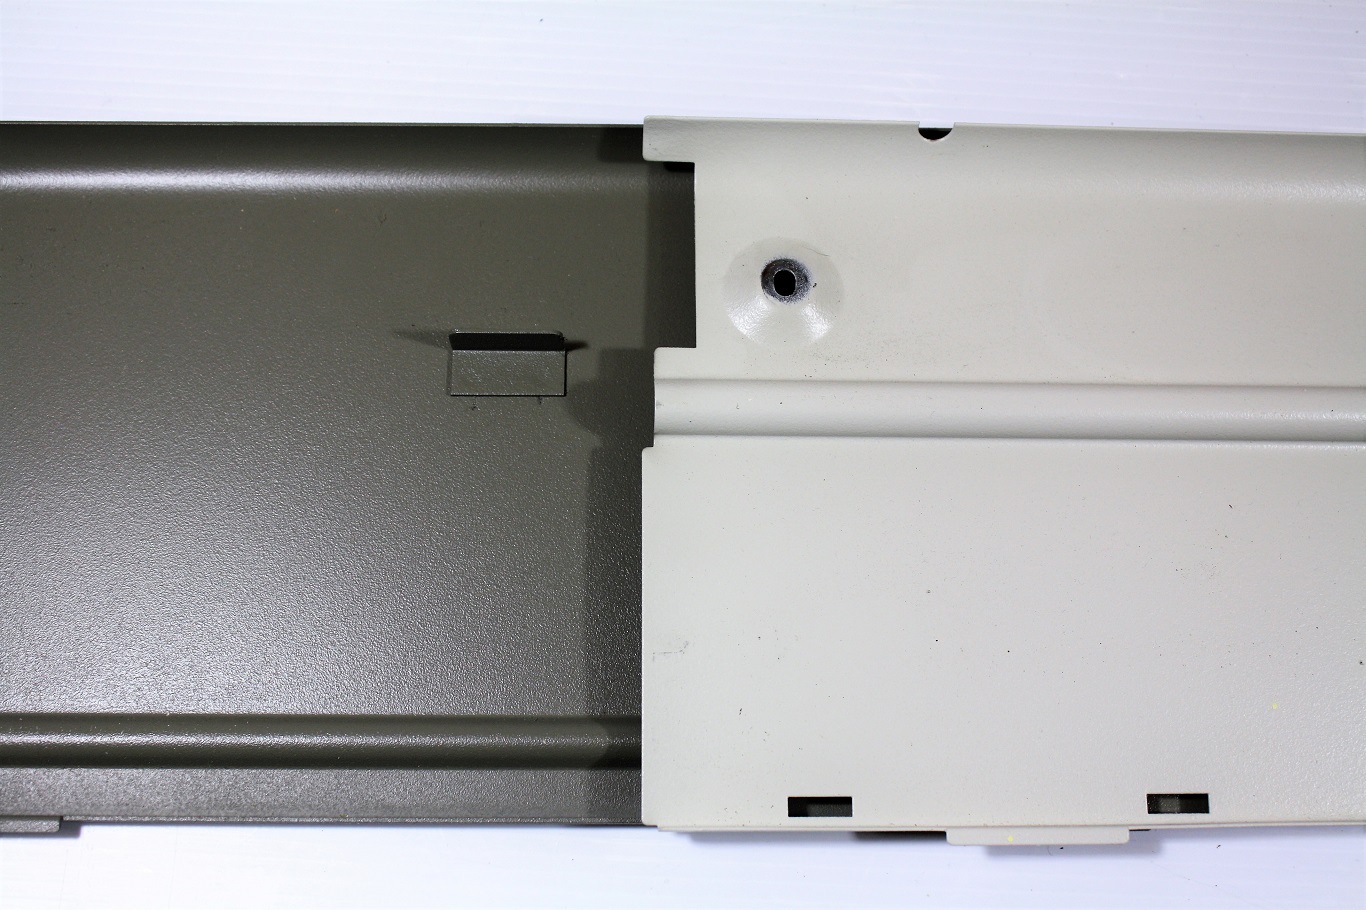 Bottom plate with the curved portion that stabilizes the keyboard mechanism from the underside.